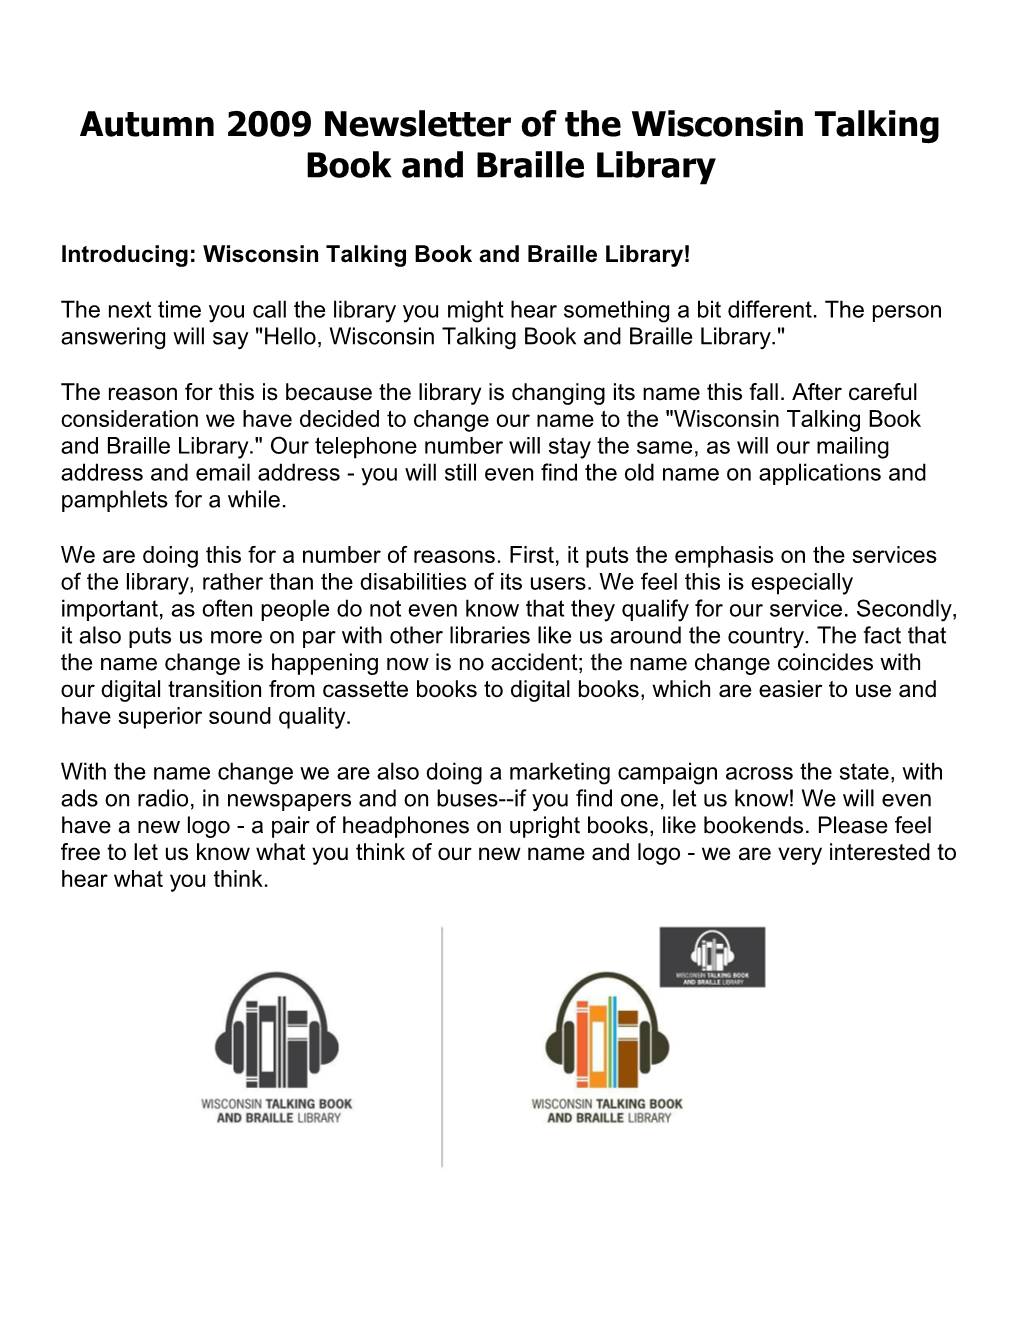 Autumn 2009 Newsletter of the Wisconsin Talking Book and Braille Library